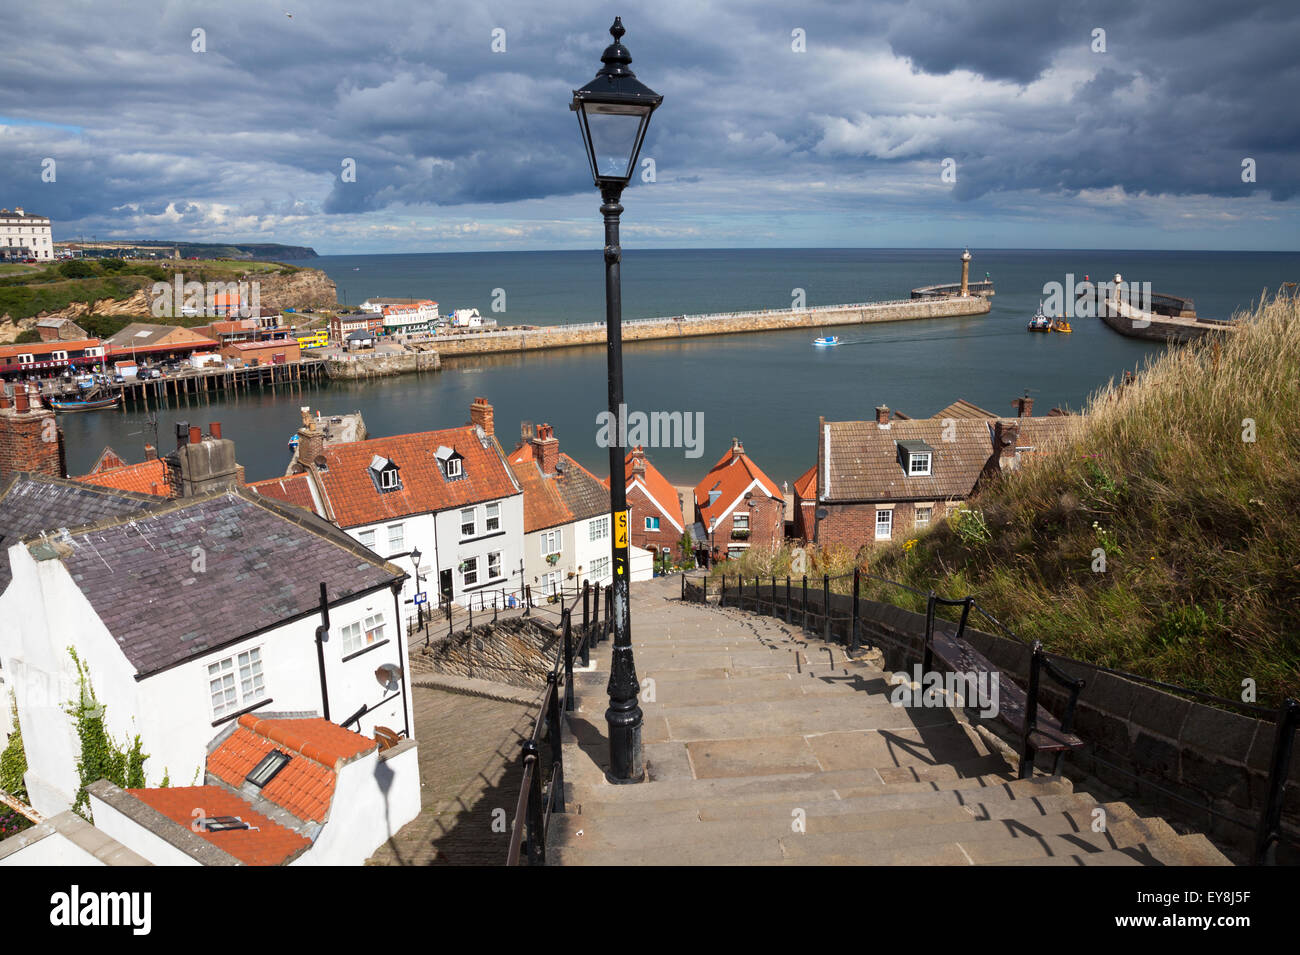 The famous 199 steps linking the Harbour to St Mary's Church and Whitby Abbey in Whitby, North Yorkshire, England, U.K. Stock Photo